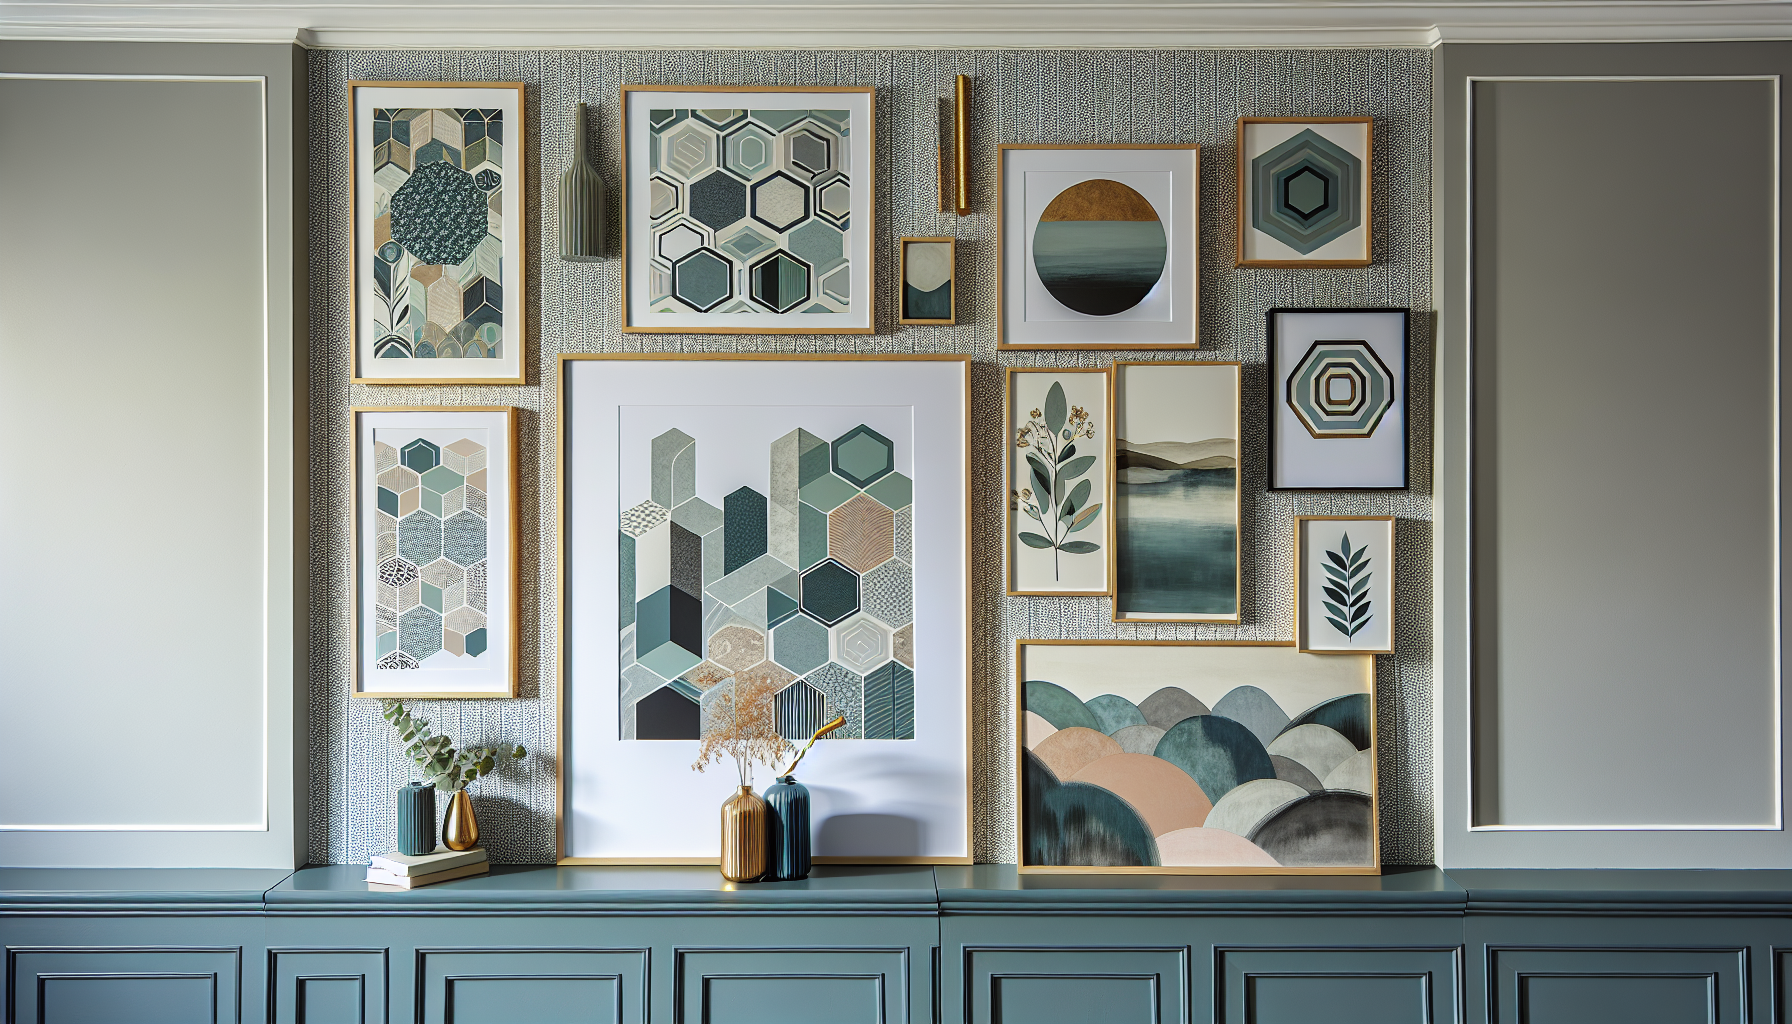 Removable wallpaper and creative framing techniques